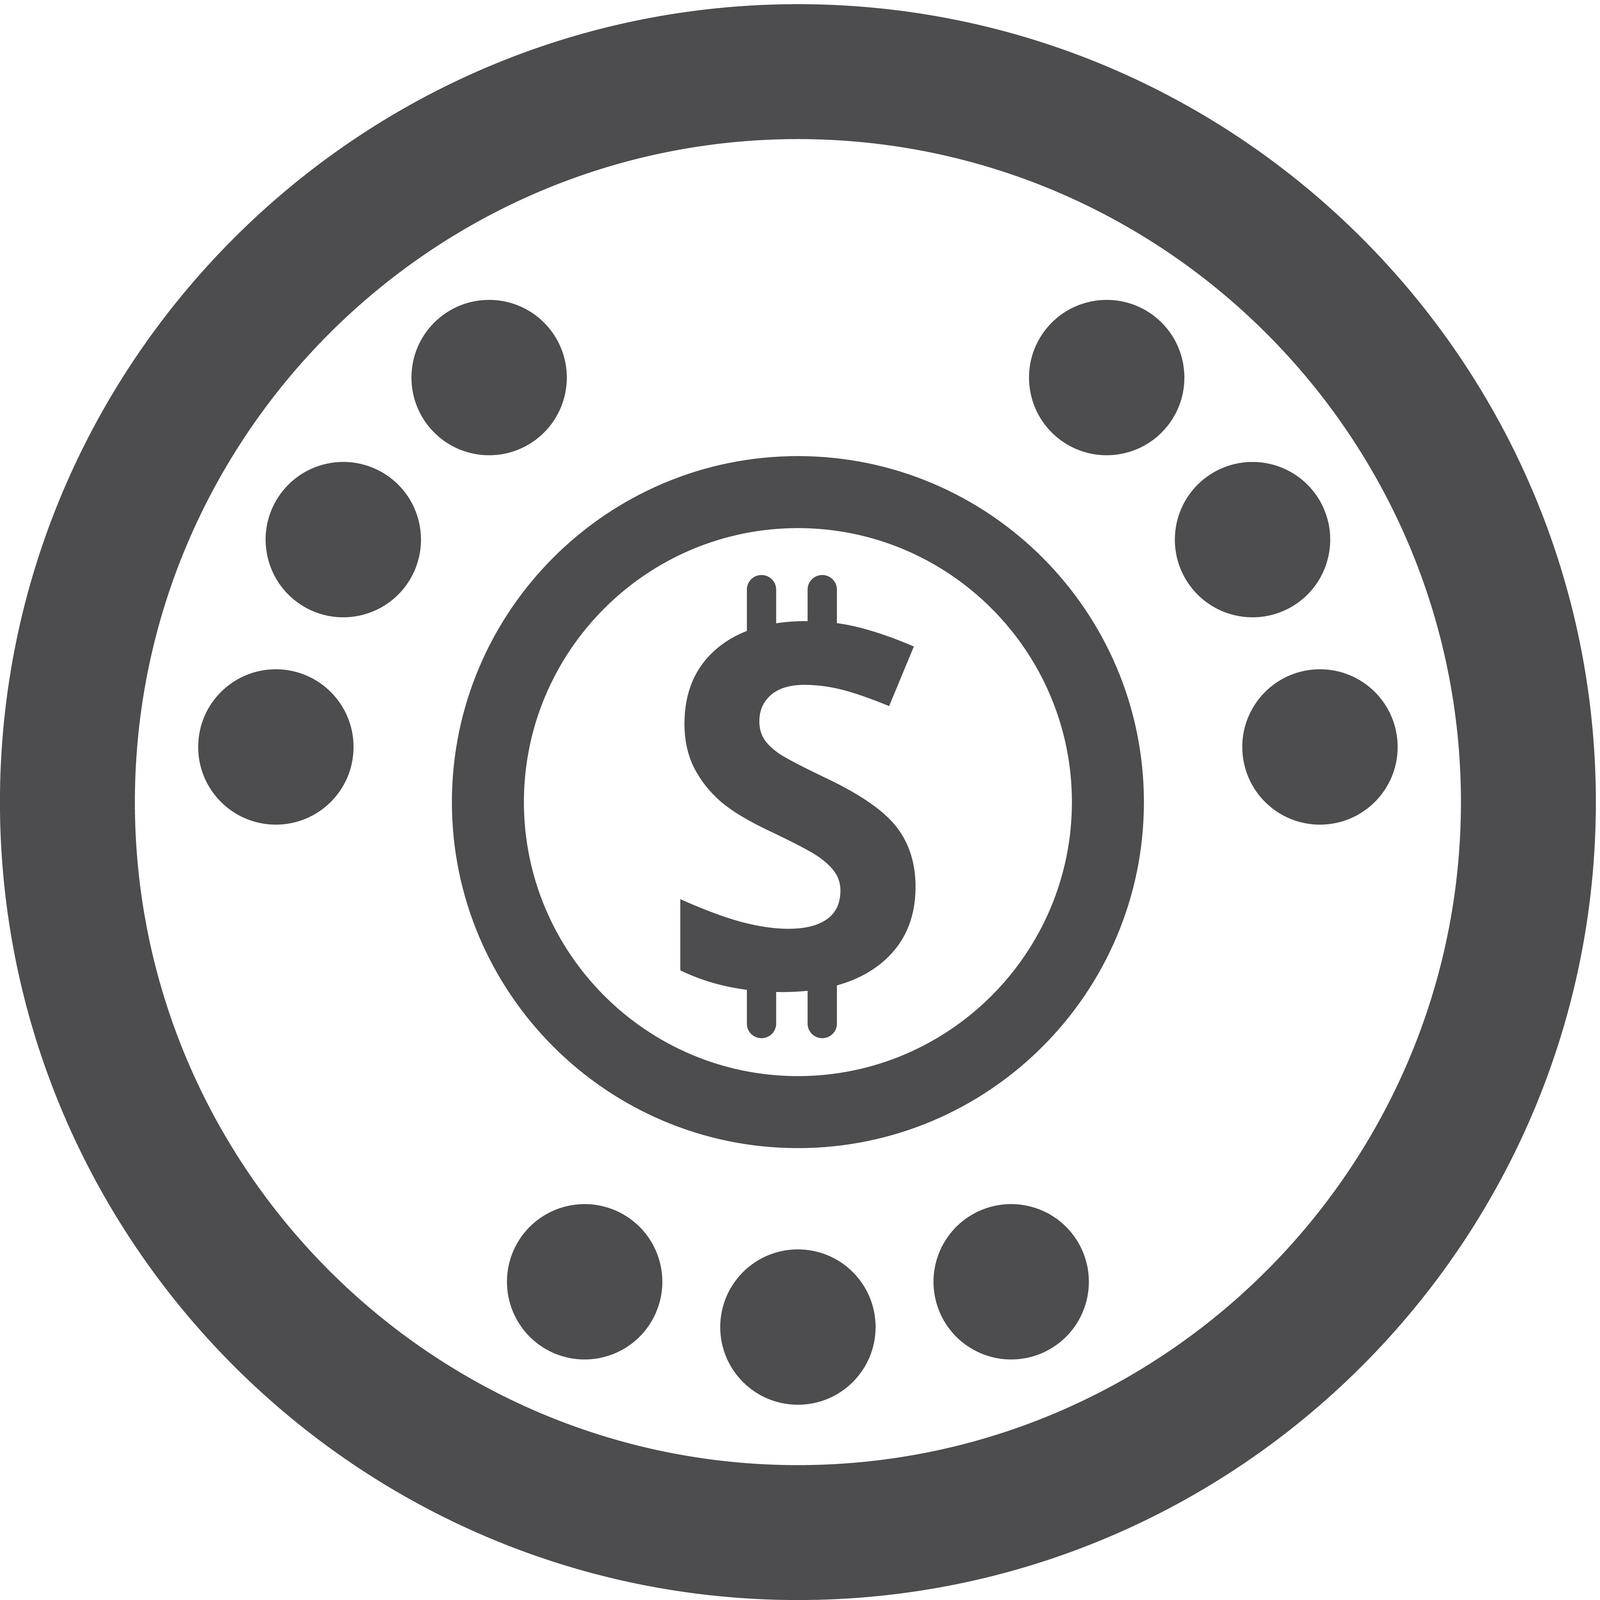 Gambling coin icon in thick outline style. Black and white monochrome vector illustration.